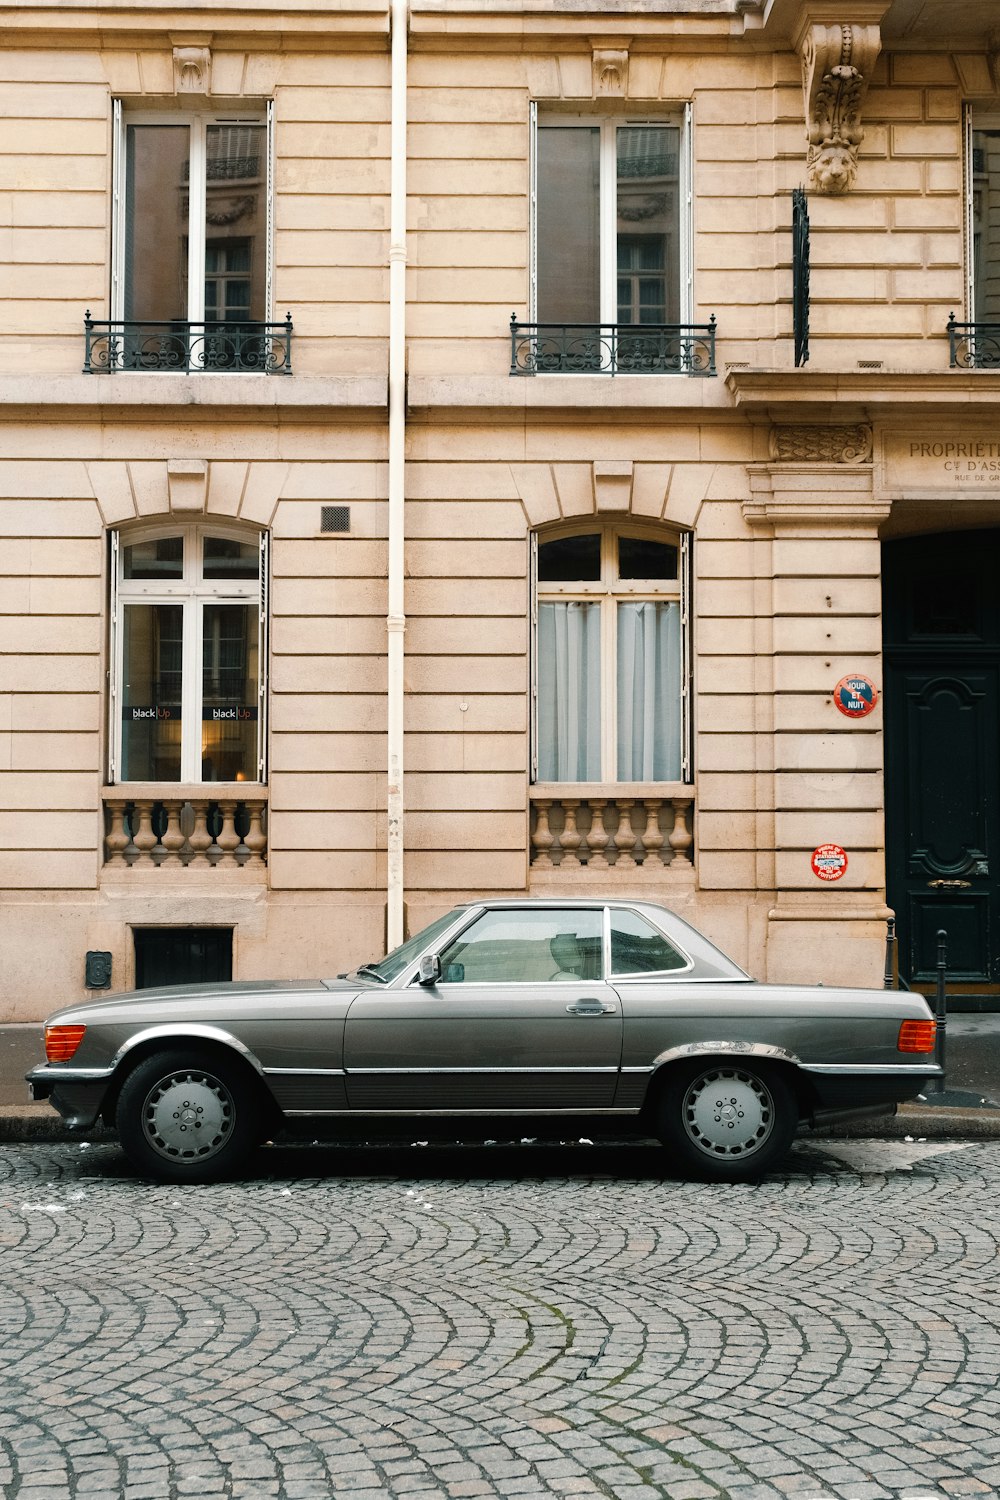 a car parked on a cobblestone street in front of a building